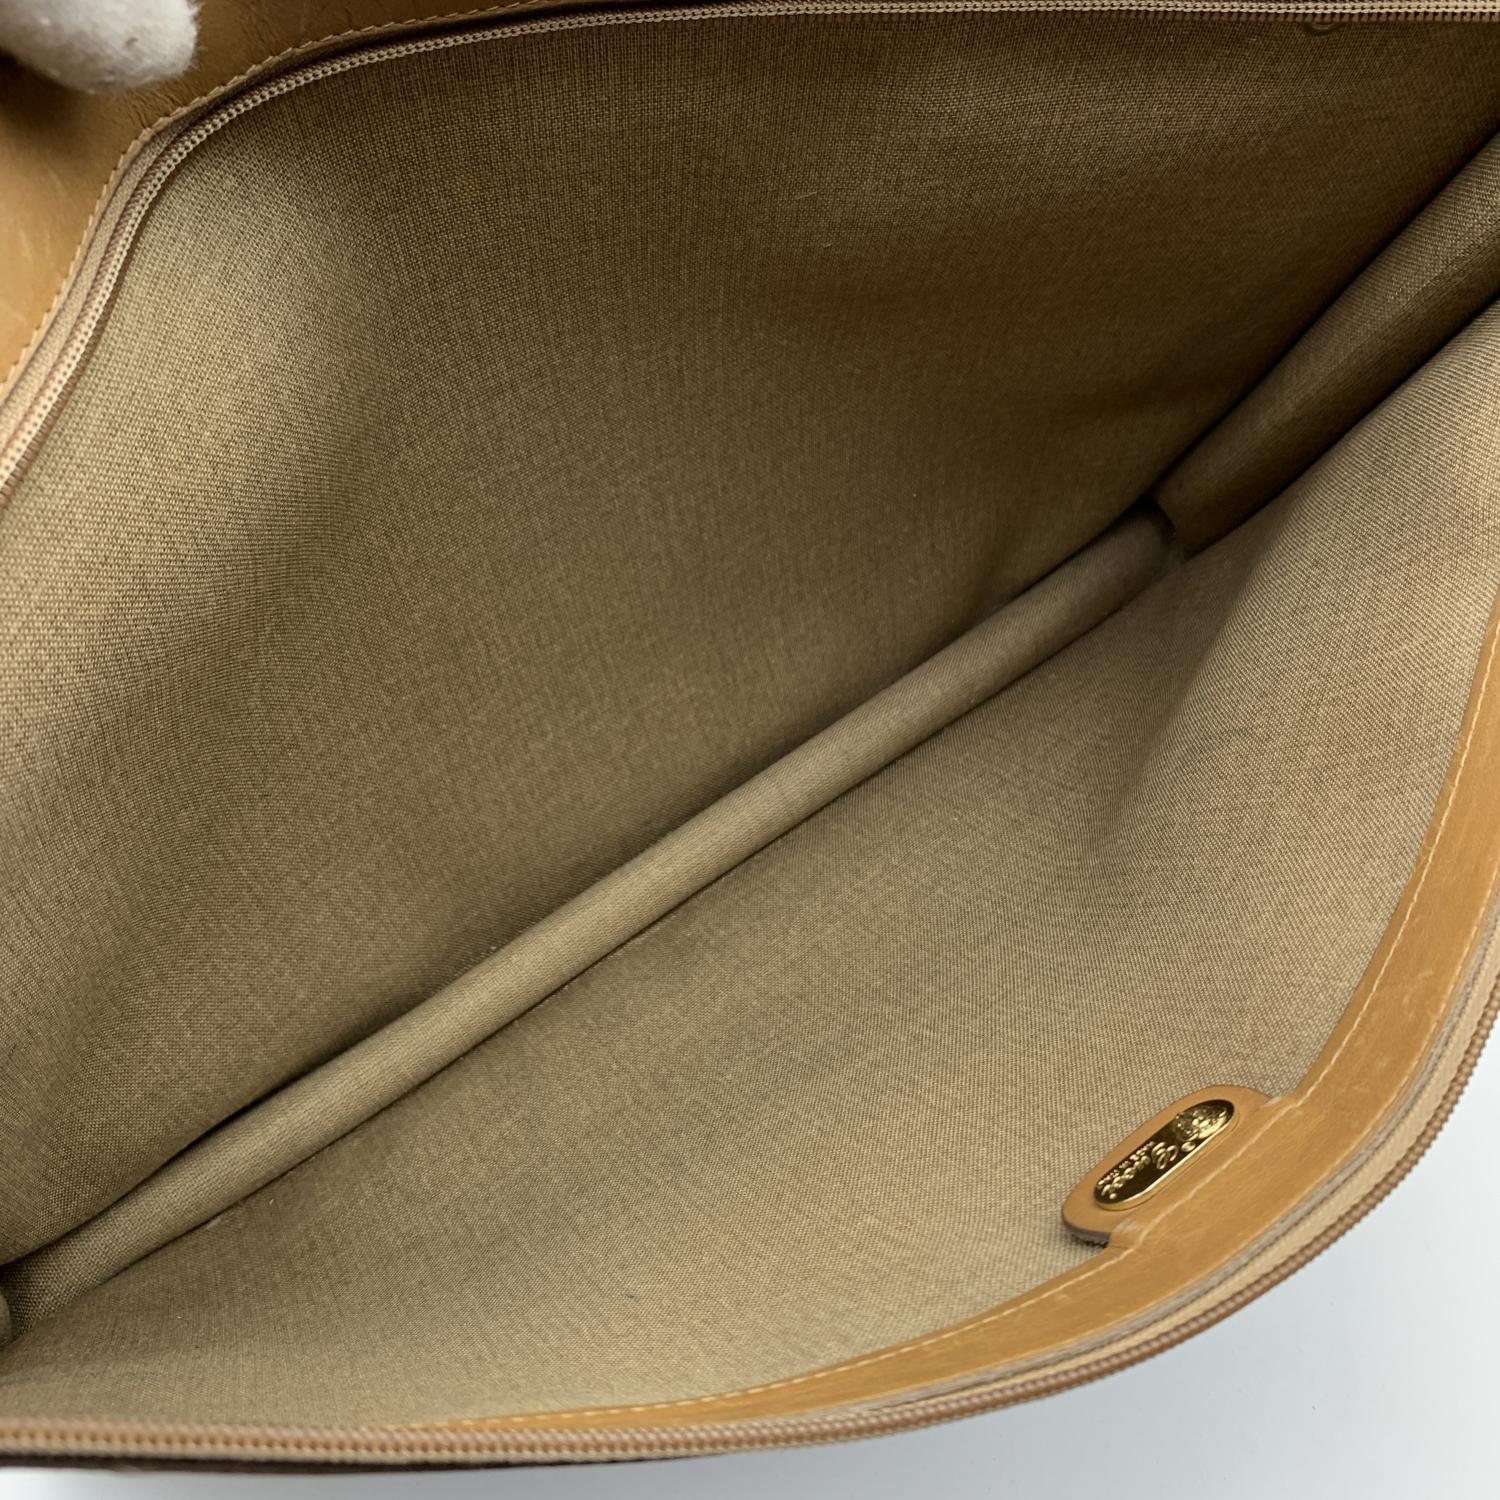 Vintage Gucci brown GG monogram canvas portfolio bag with beige leather lining. It features a front zipper closure and gold meta zipper pull with engraved GG logo. The interior of the portfolio is lined in beige canvas. 'GUCCI - Made in Italy' tags